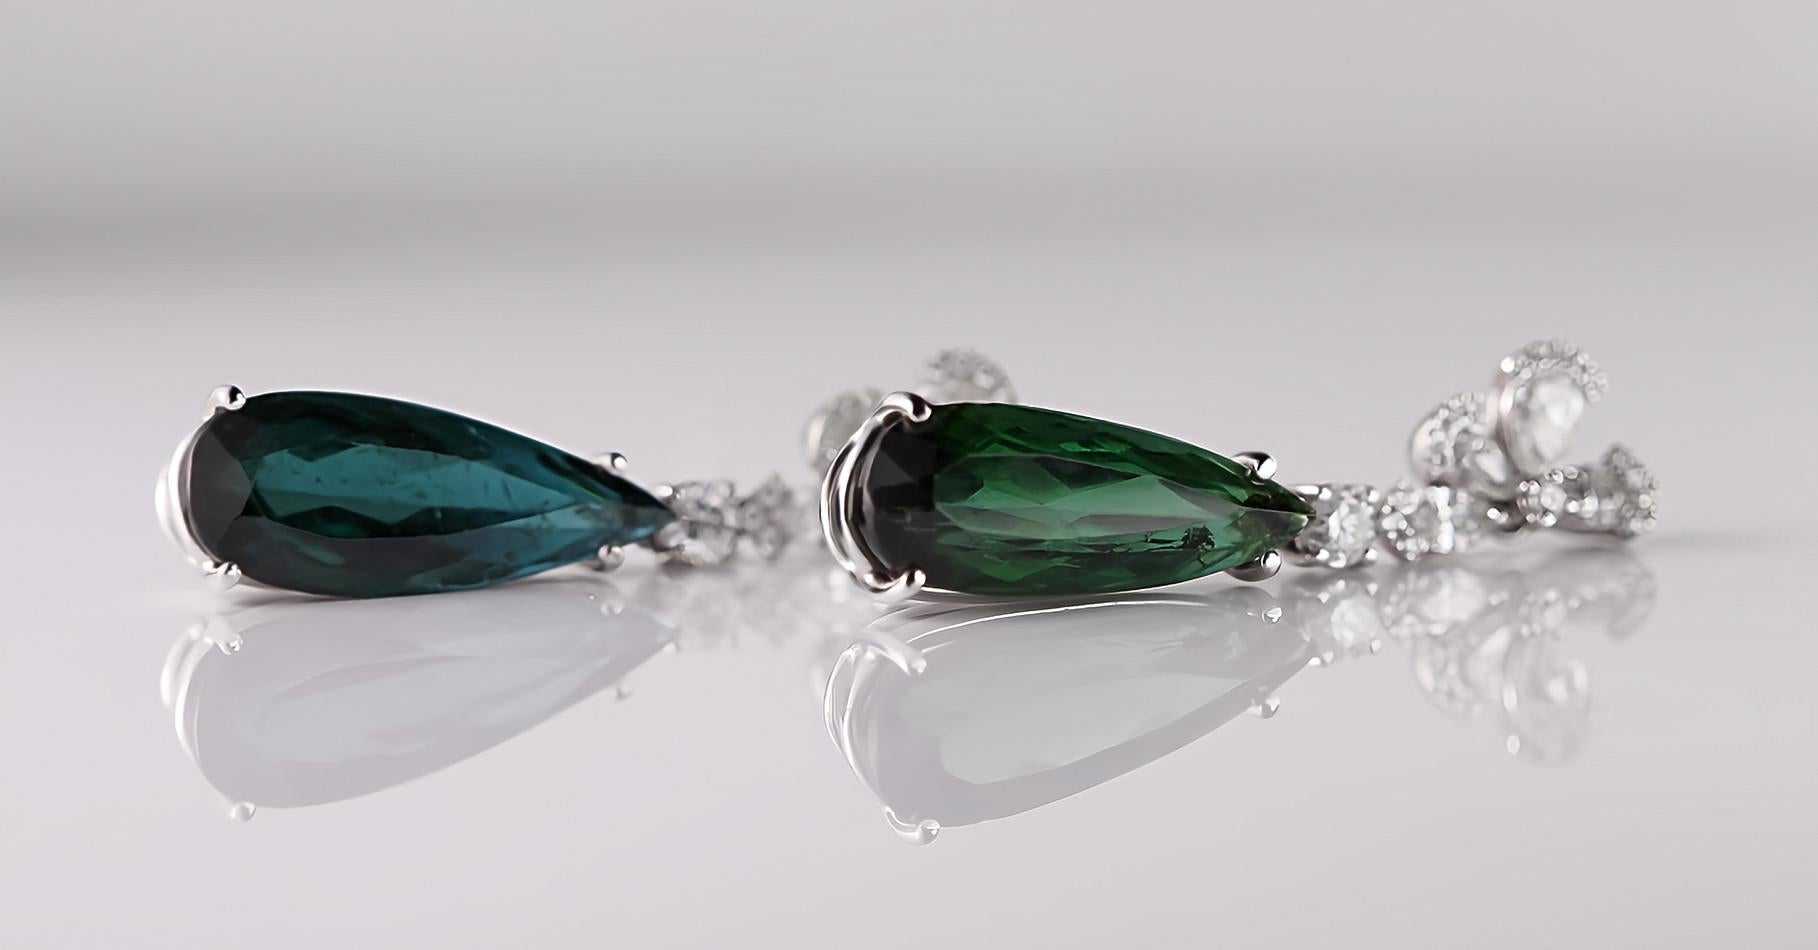 Discover the craftsmanship and elegance of these earrings crafted in 18kt white gold with a total weight of 8 gr. 

Featuring two natural Tourmalines cut in a drop shape, they showcase slightly different original hues: one leaning toward green while